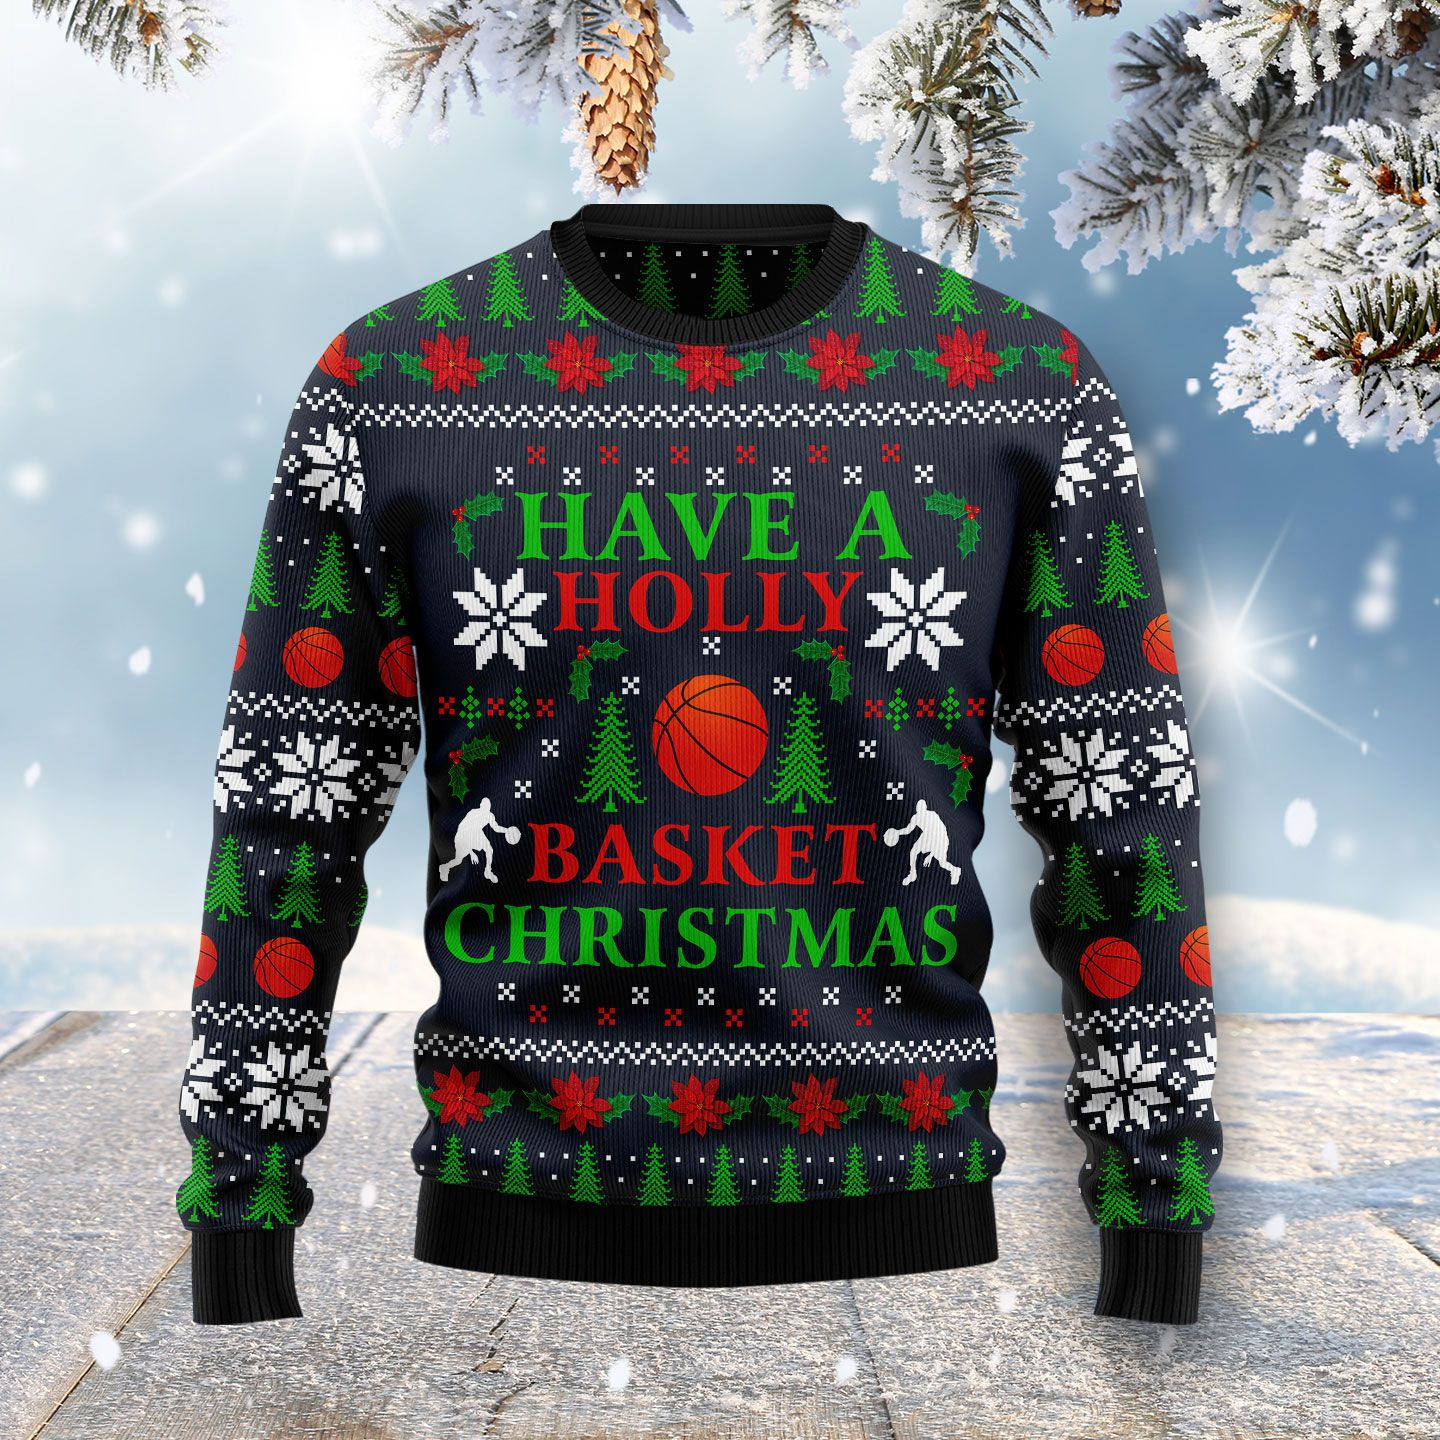 Holly Basket Basketball Christmas Ugly Christmas Sweater, Ugly Sweater For Men Women, Holiday Sweater